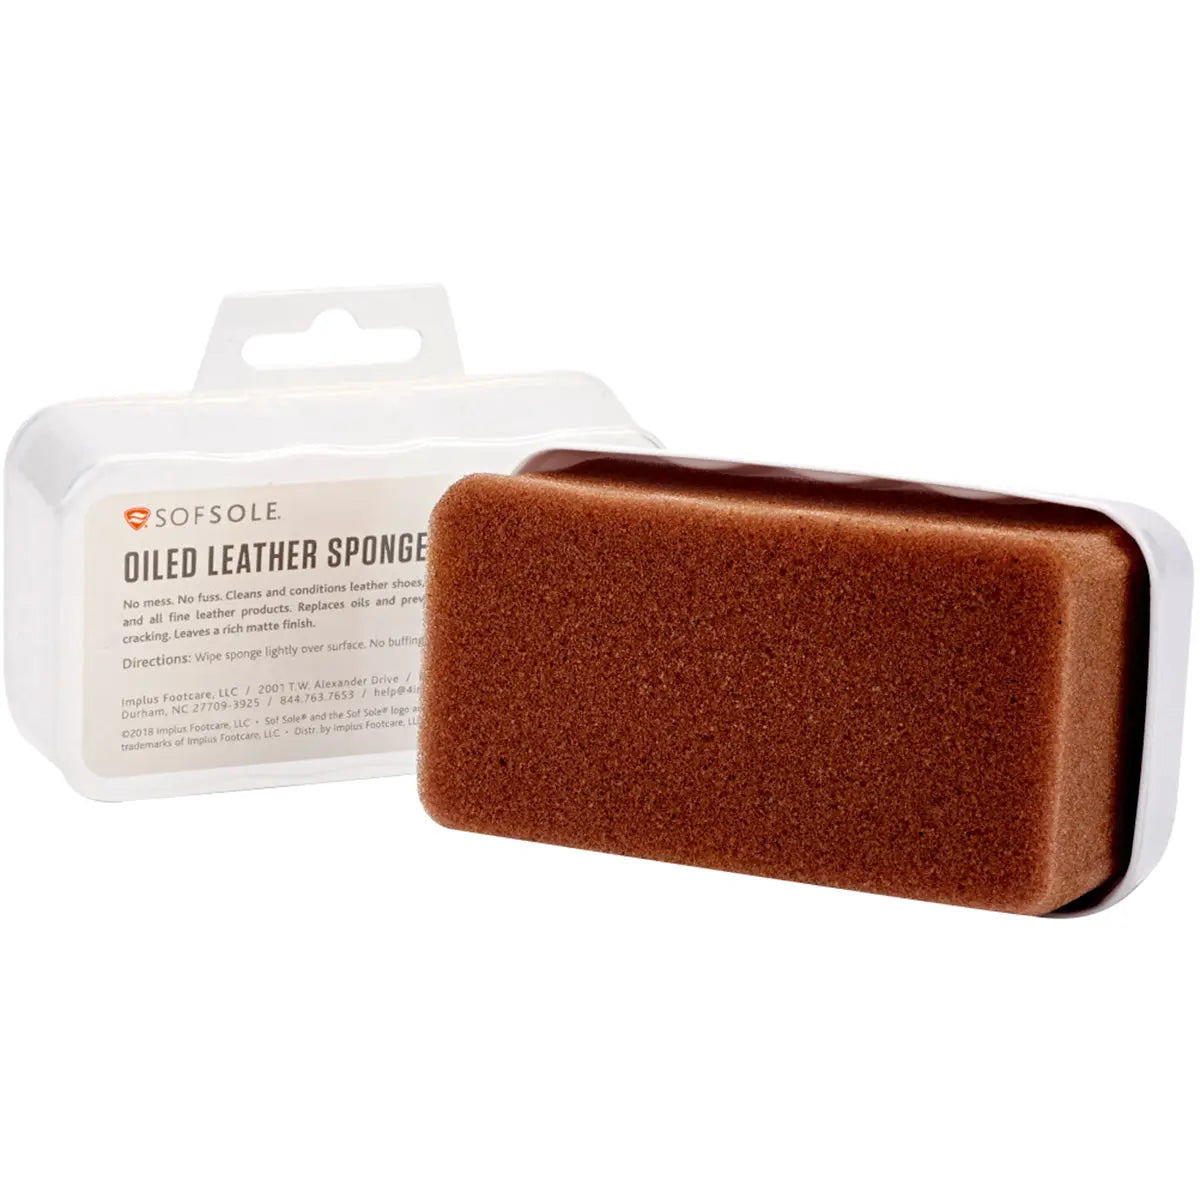 Sof Sole Oiled Leather Sponge SofSole